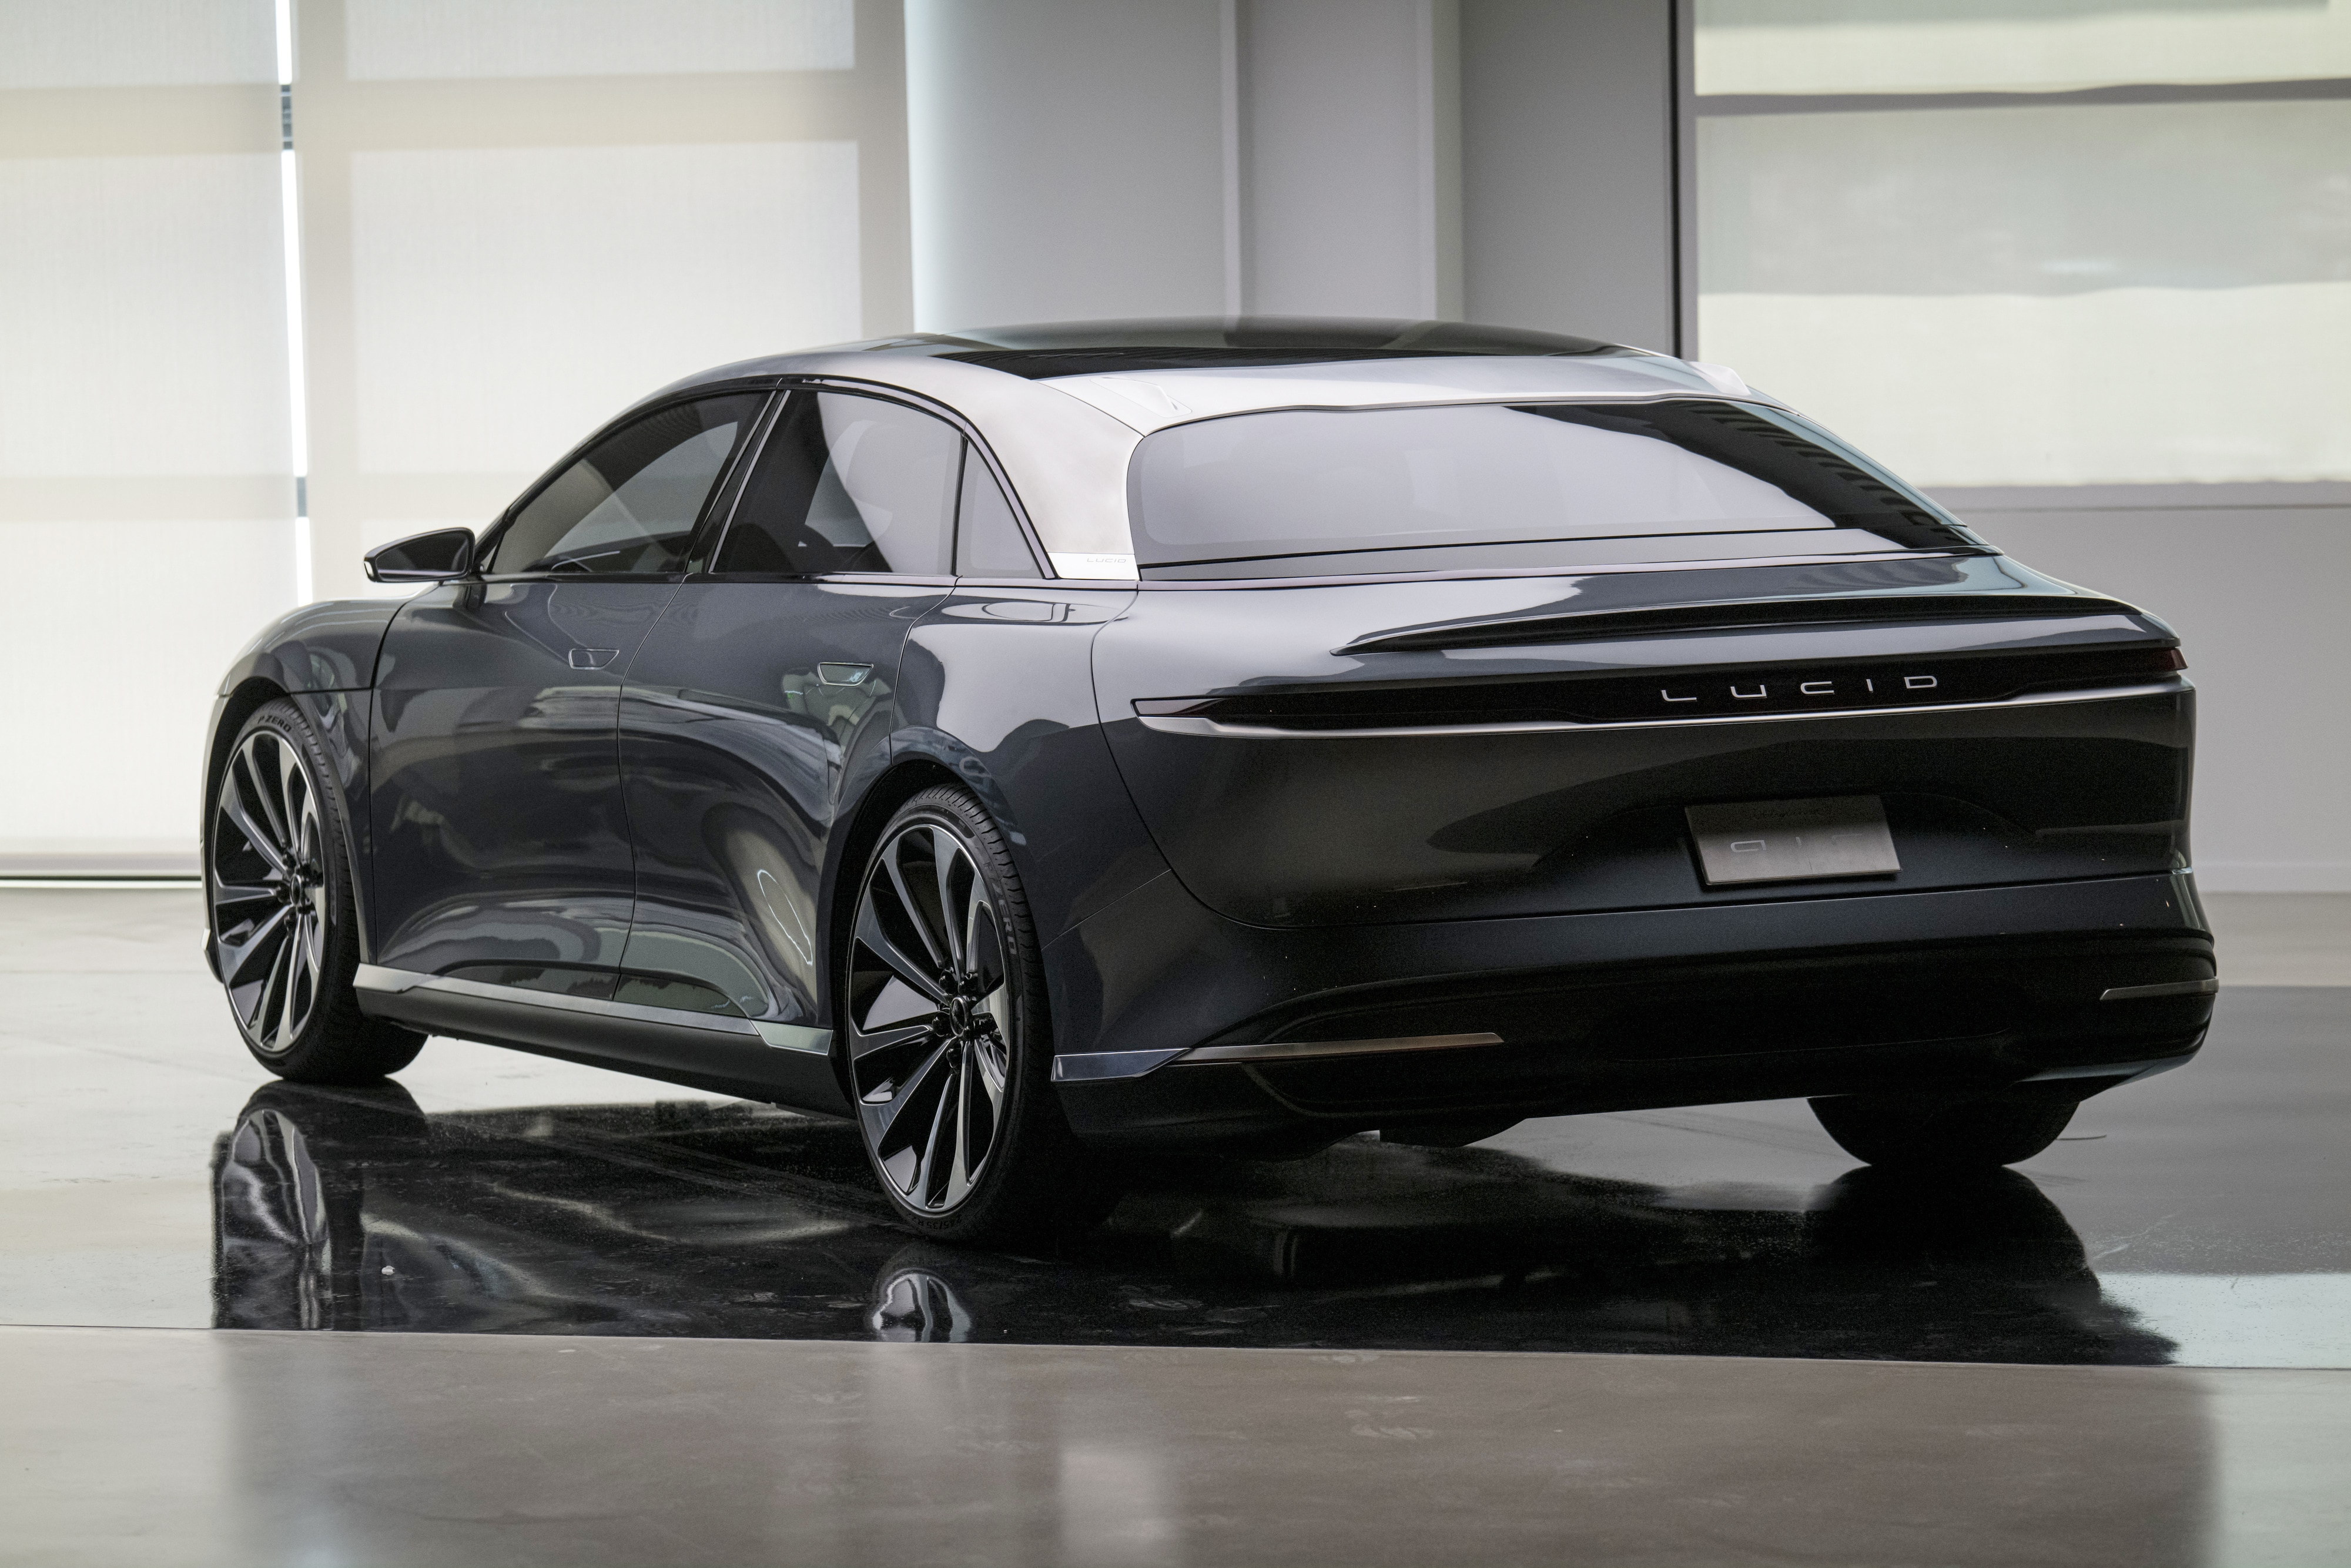 The Lucid Air prototype electric vehicle, manufactured by Lucid Motors Inc., is displayed at the company's headquarters in Newark, California, U.S., on Monday, Aug. 3, 2020. The final specs and design of the Lucid Air are due to be unveiled at an event in September and executives say customers can now expect delivery of the first batch of Airs in spring 2021.